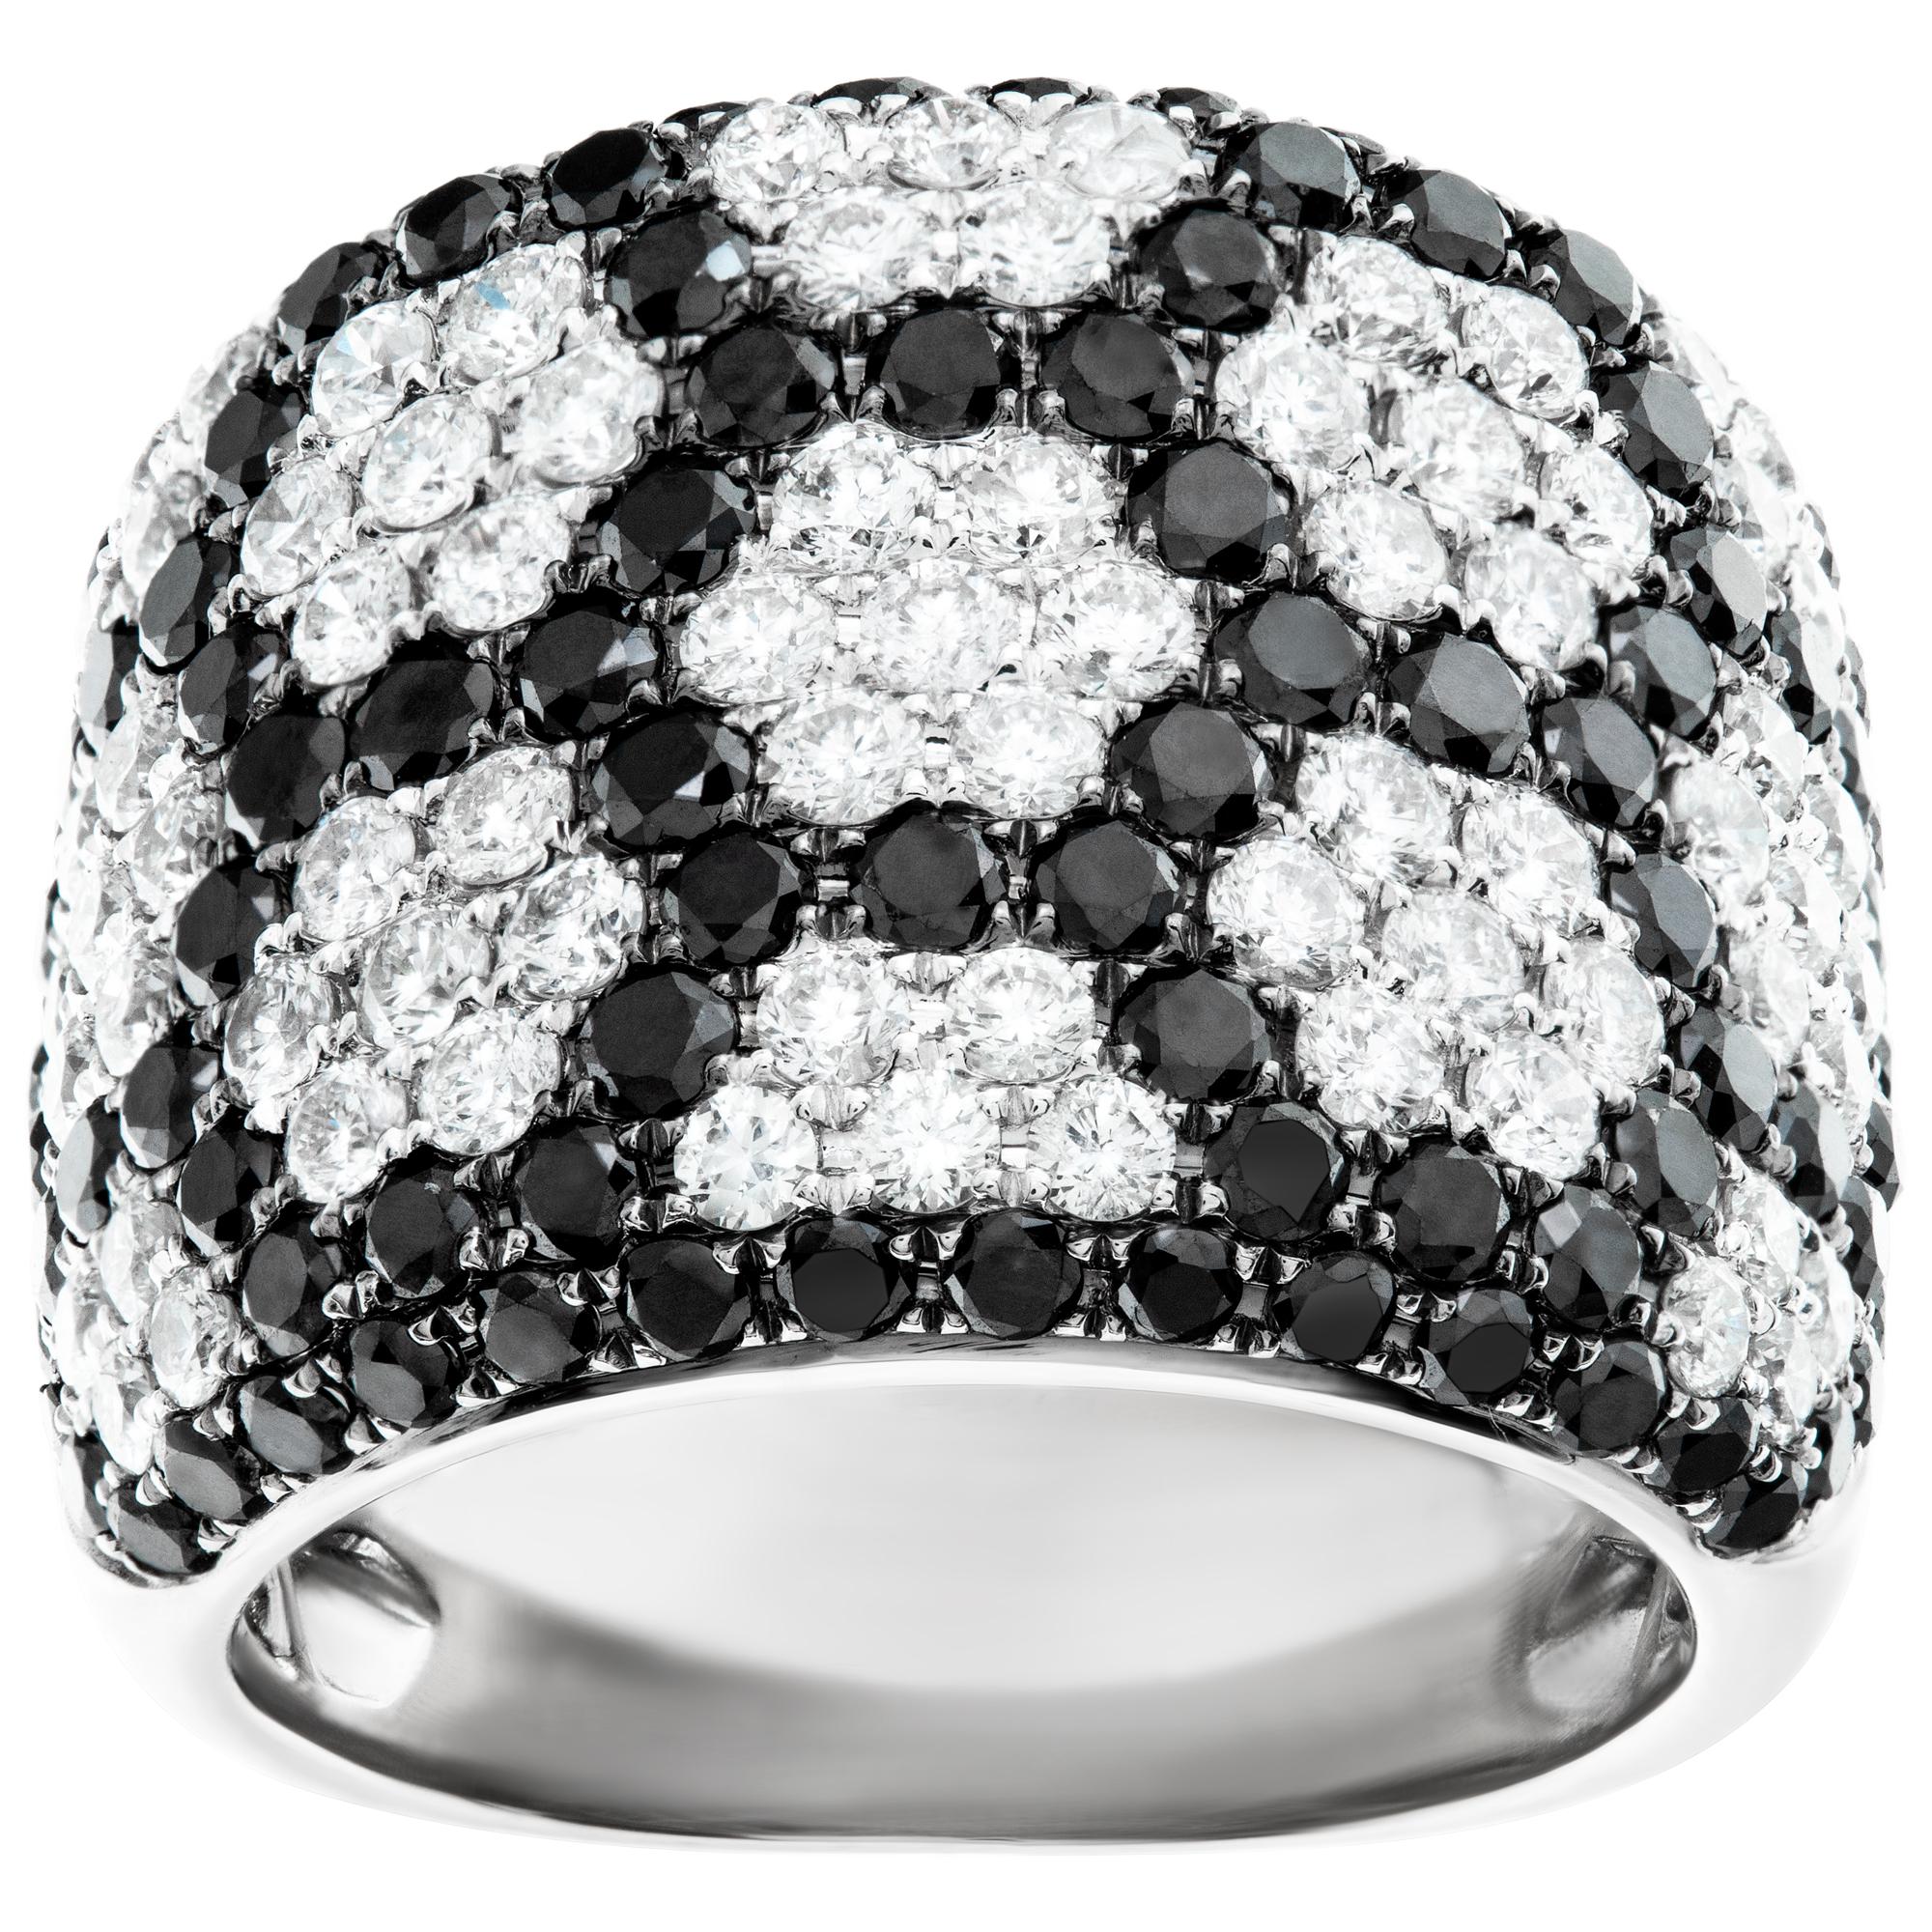 White & black diamonds ring set in 18K white gold. Total diamonds approx weight 3.00 carats. White round brilliant cut diamonds estimate: G-H color, VS clarity. Height: 5/8 inches.Size 5This Diamond ring is currently size 5 and some items can be